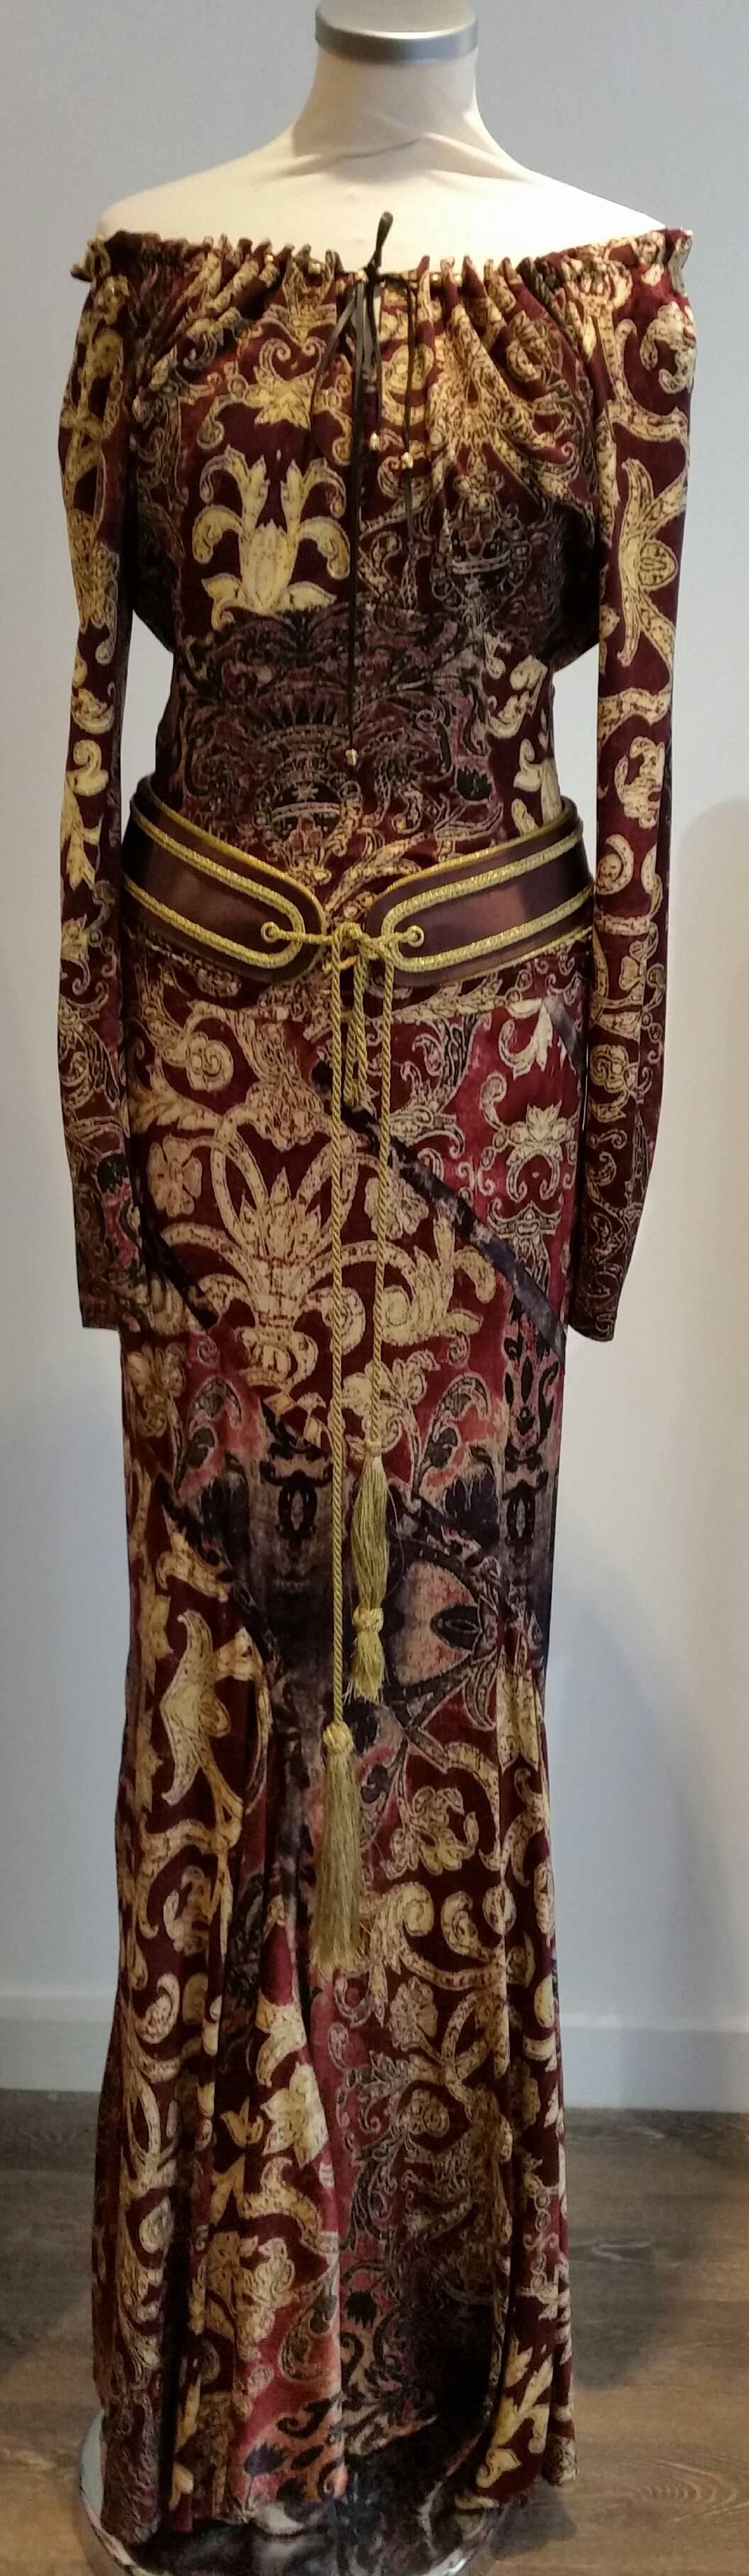 This Robert Cavalli outfit is a stunning piece. Rich burgundy and antique golds.
It is actually a two piece. Peasant style top can be worn on or off the shoulder with a leather tie. It is a size Sml
It is a stretchy silk.
The skirt is fitted with an